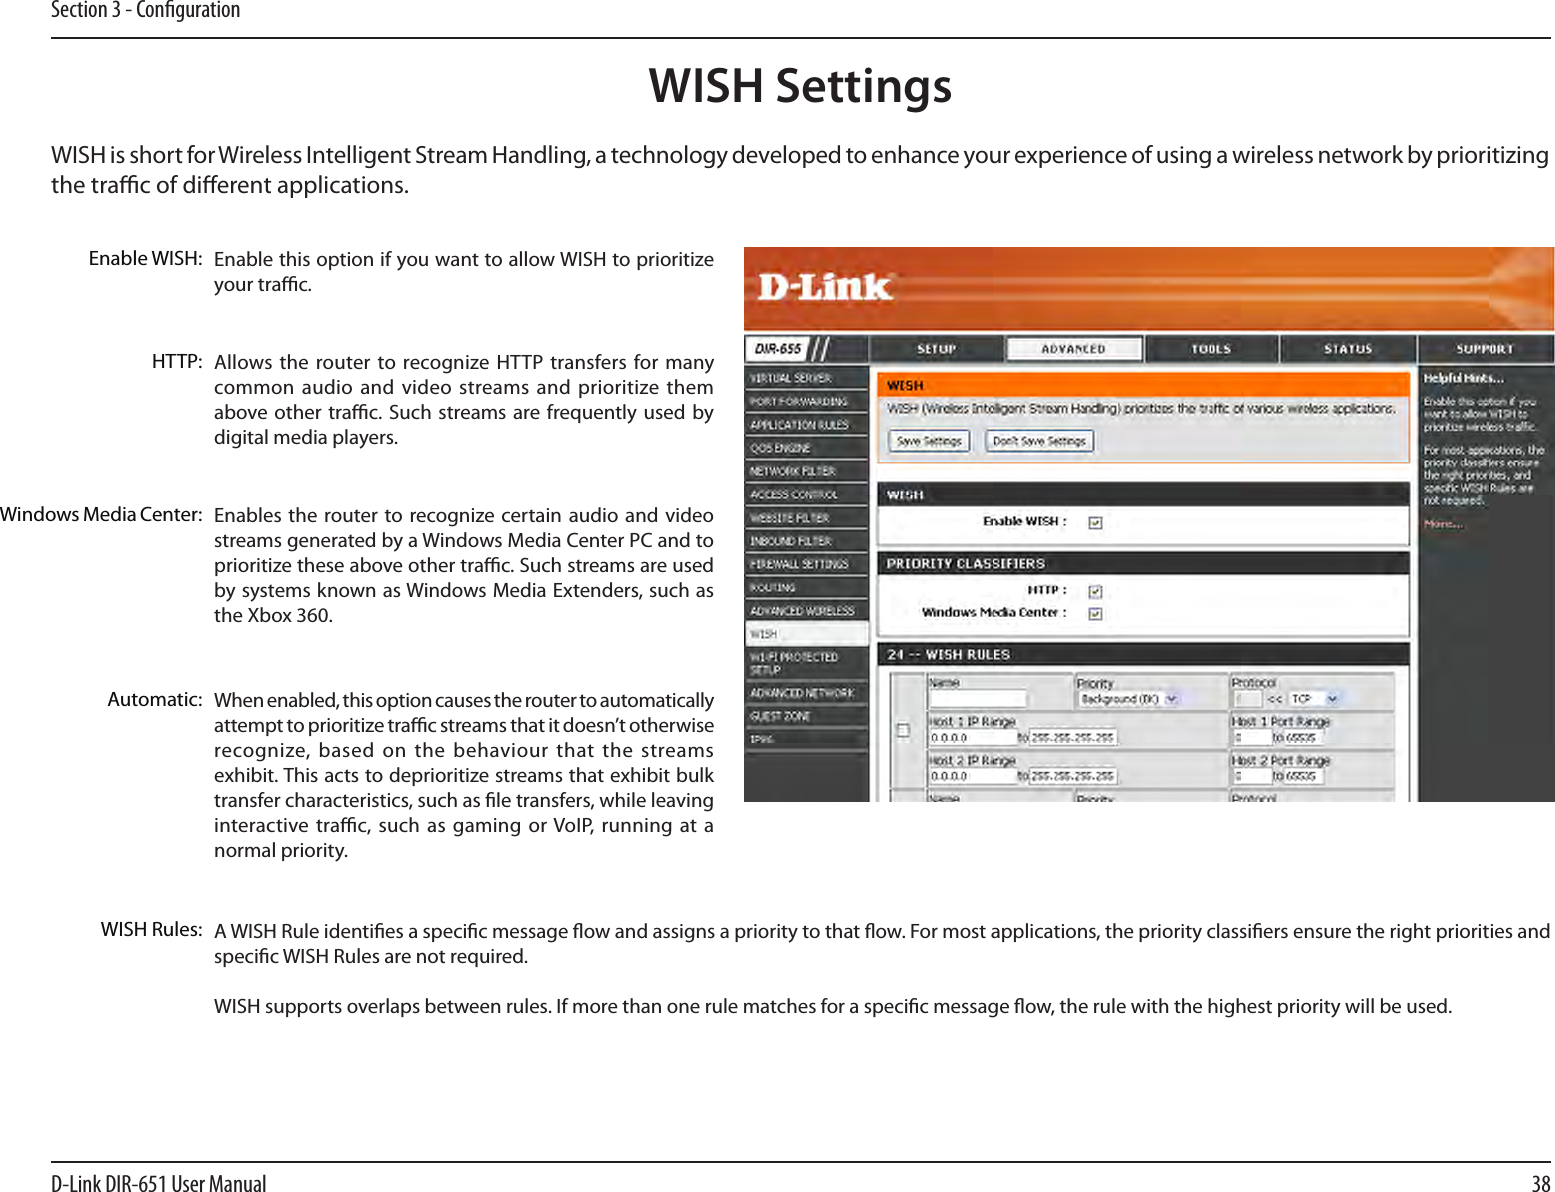 38D-Link DIR-651 User ManualSection 3 - CongurationWISH is short for Wireless Intelligent Stream Handling, a technology developed to enhance your experience of using a wireless network by prioritizing the trac of dierent applications. Enable this option if you want to allow WISH to prioritize your trac. Enable WISH:Allows the router to recognize HTTP  transfers for many common audio  and video streams and prioritize them above other trac. Such streams are frequently used  by digital media players. HTTP:Enables the  router to recognize certain audio and  video streams generated by a Windows Media Center PC and to prioritize these above other trac. Such streams are used by systems known as Windows Media Extenders, such as the Xbox 360. Windows Media Center:When enabled, this option causes the router to automatically attempt to prioritize trac streams that it doesn’t otherwise recognize, based on  the  behaviour that  the  streams exhibit. This acts to deprioritize streams that exhibit bulk transfer characteristics, such as le transfers, while leaving interactive trac, such  as gaming or VoIP,  running  at a normal priority.Automatic:WISH Rules: A WISH Rule identies a specic message ow and assigns a priority to that ow. For most applications, the priority classiers ensure the right priorities and specic WISH Rules are not required. WISH supports overlaps between rules. If more than one rule matches for a specic message ow, the rule with the highest priority will be used. WISH Settings